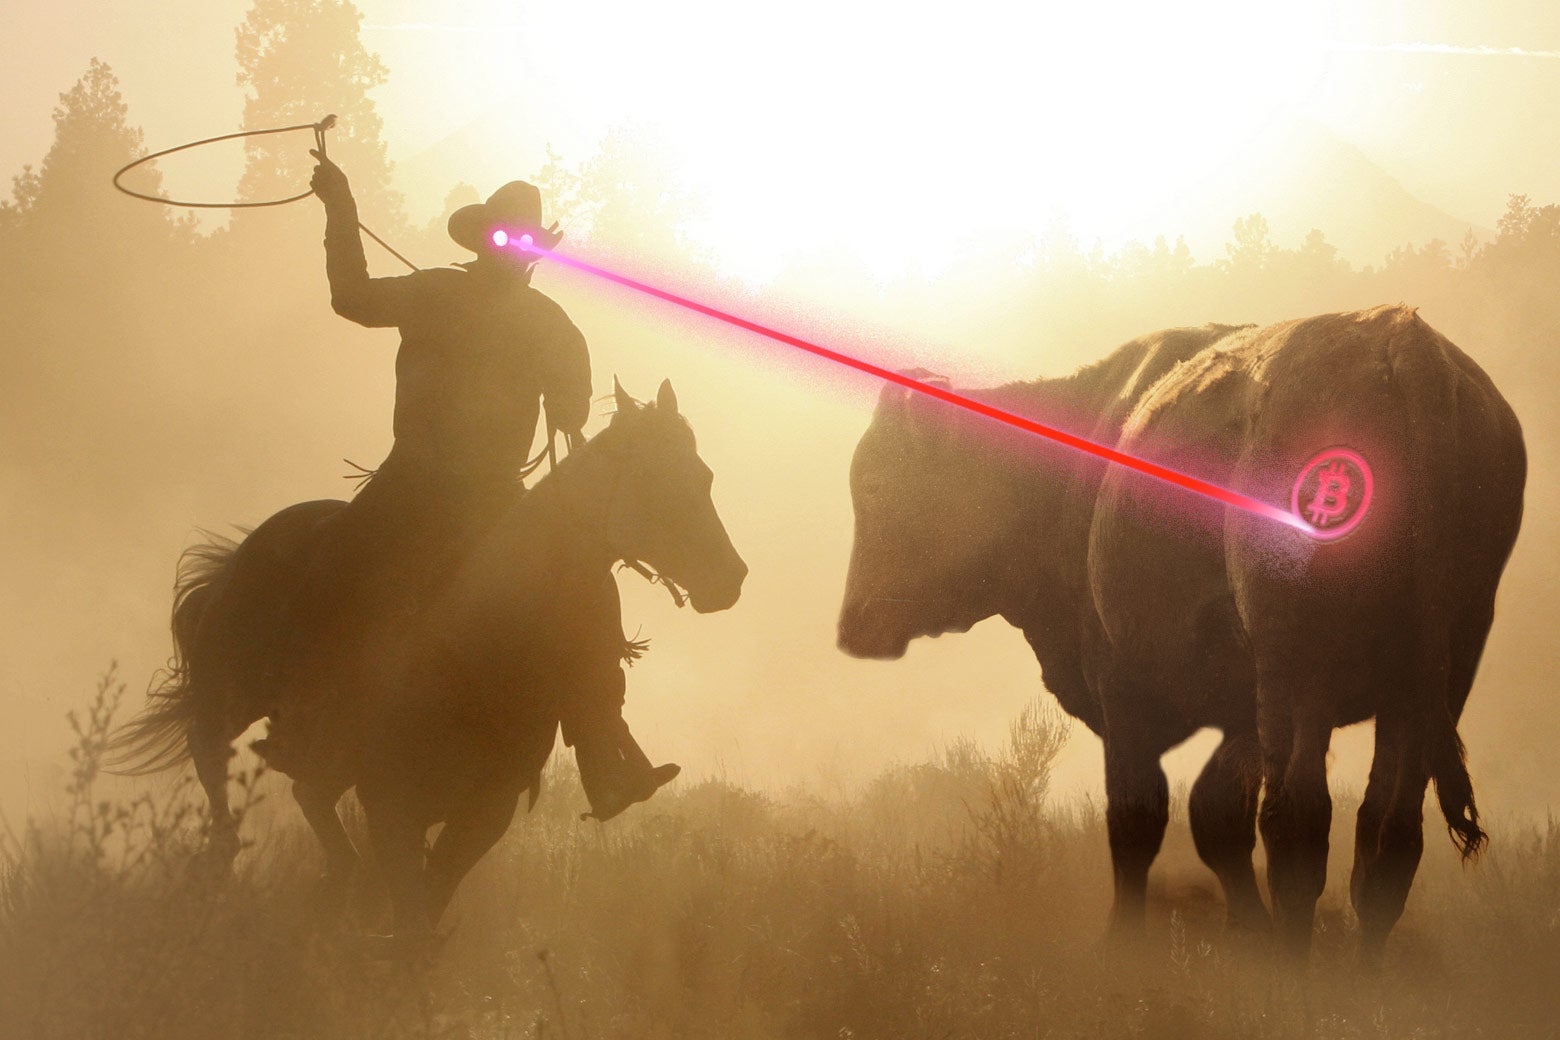 A cowboy with lasers coming out of his eyes etches a Bitcoin logo (in laser) on a cow's rear end.